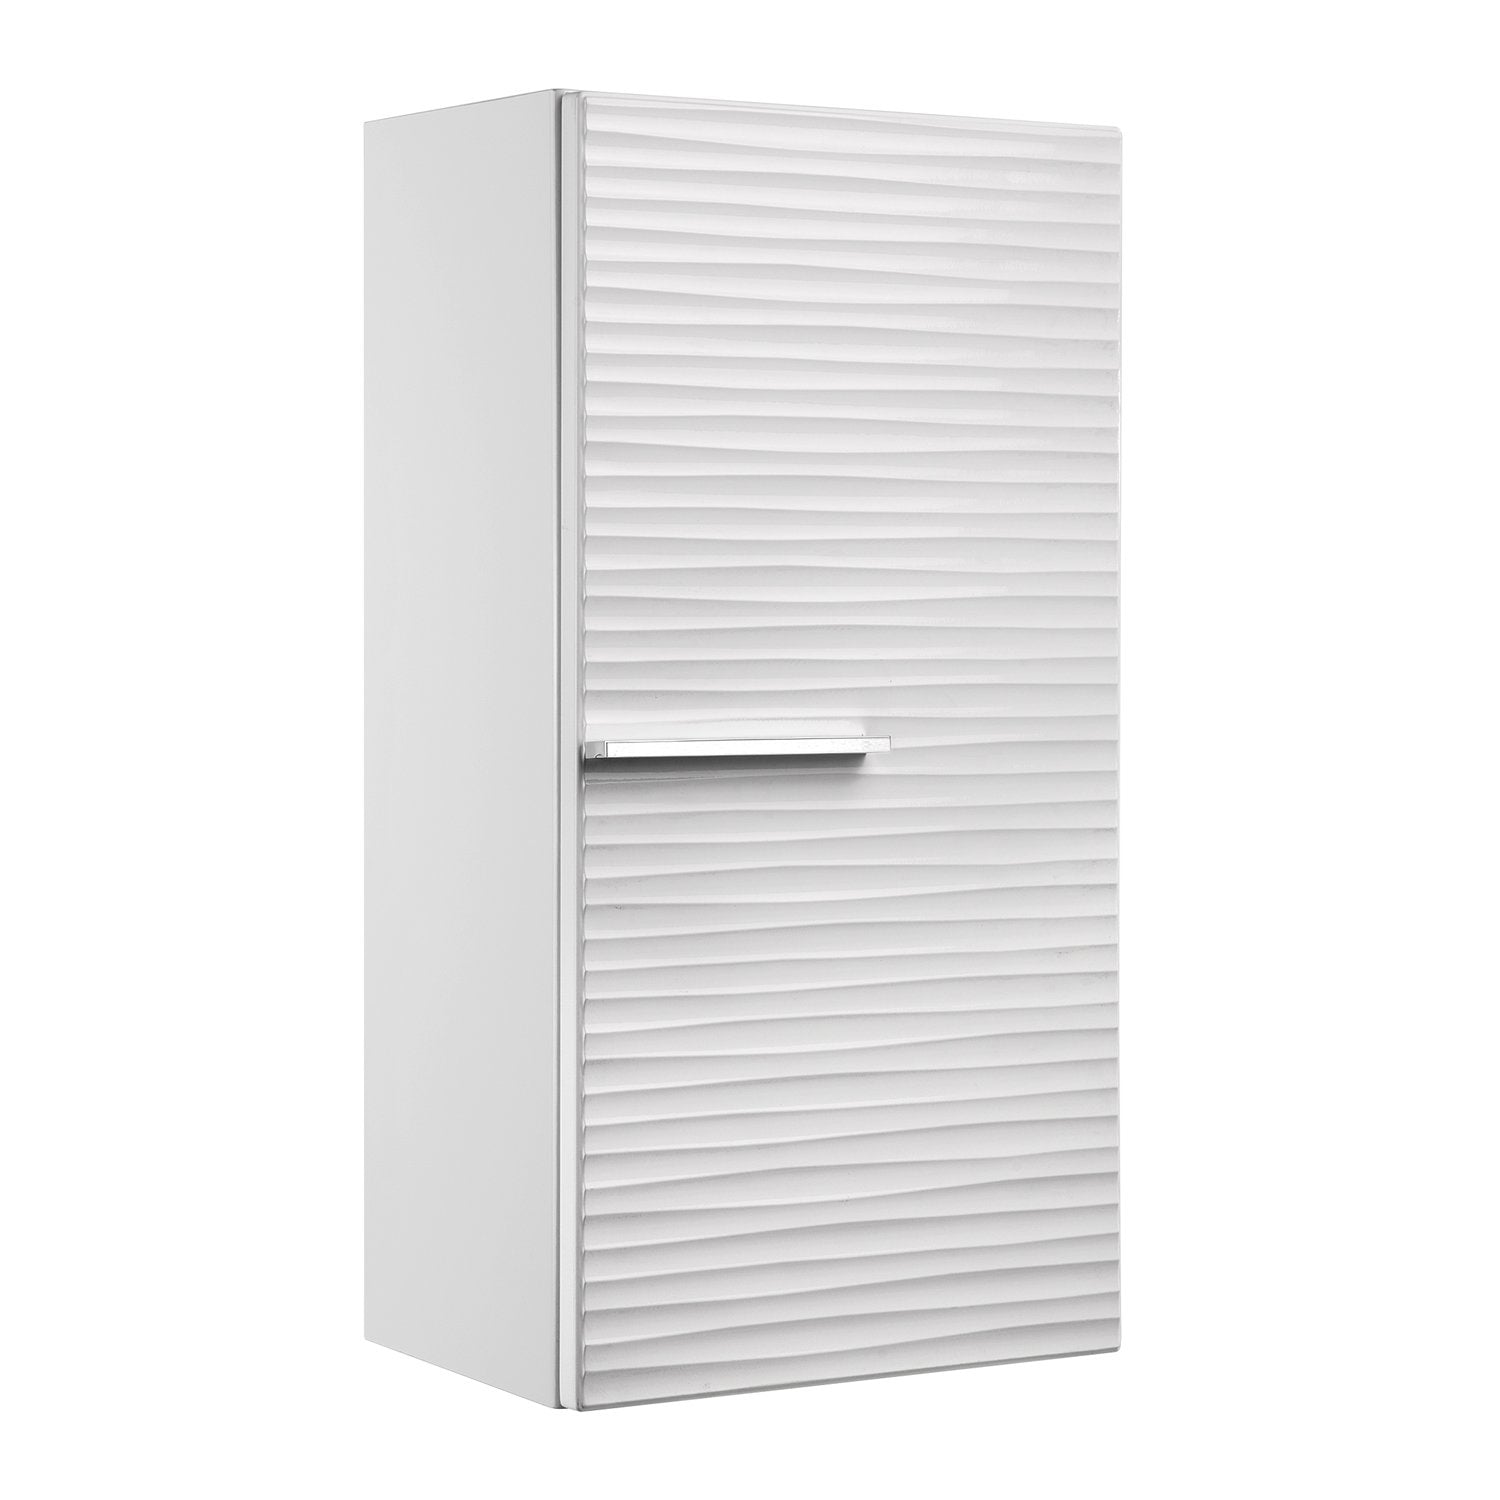 16" Small Side Cabinet, Wall Mount, 1 Door whit Handle and Soft Close and Left Opening, White, Serie Dune by VALENZUELA